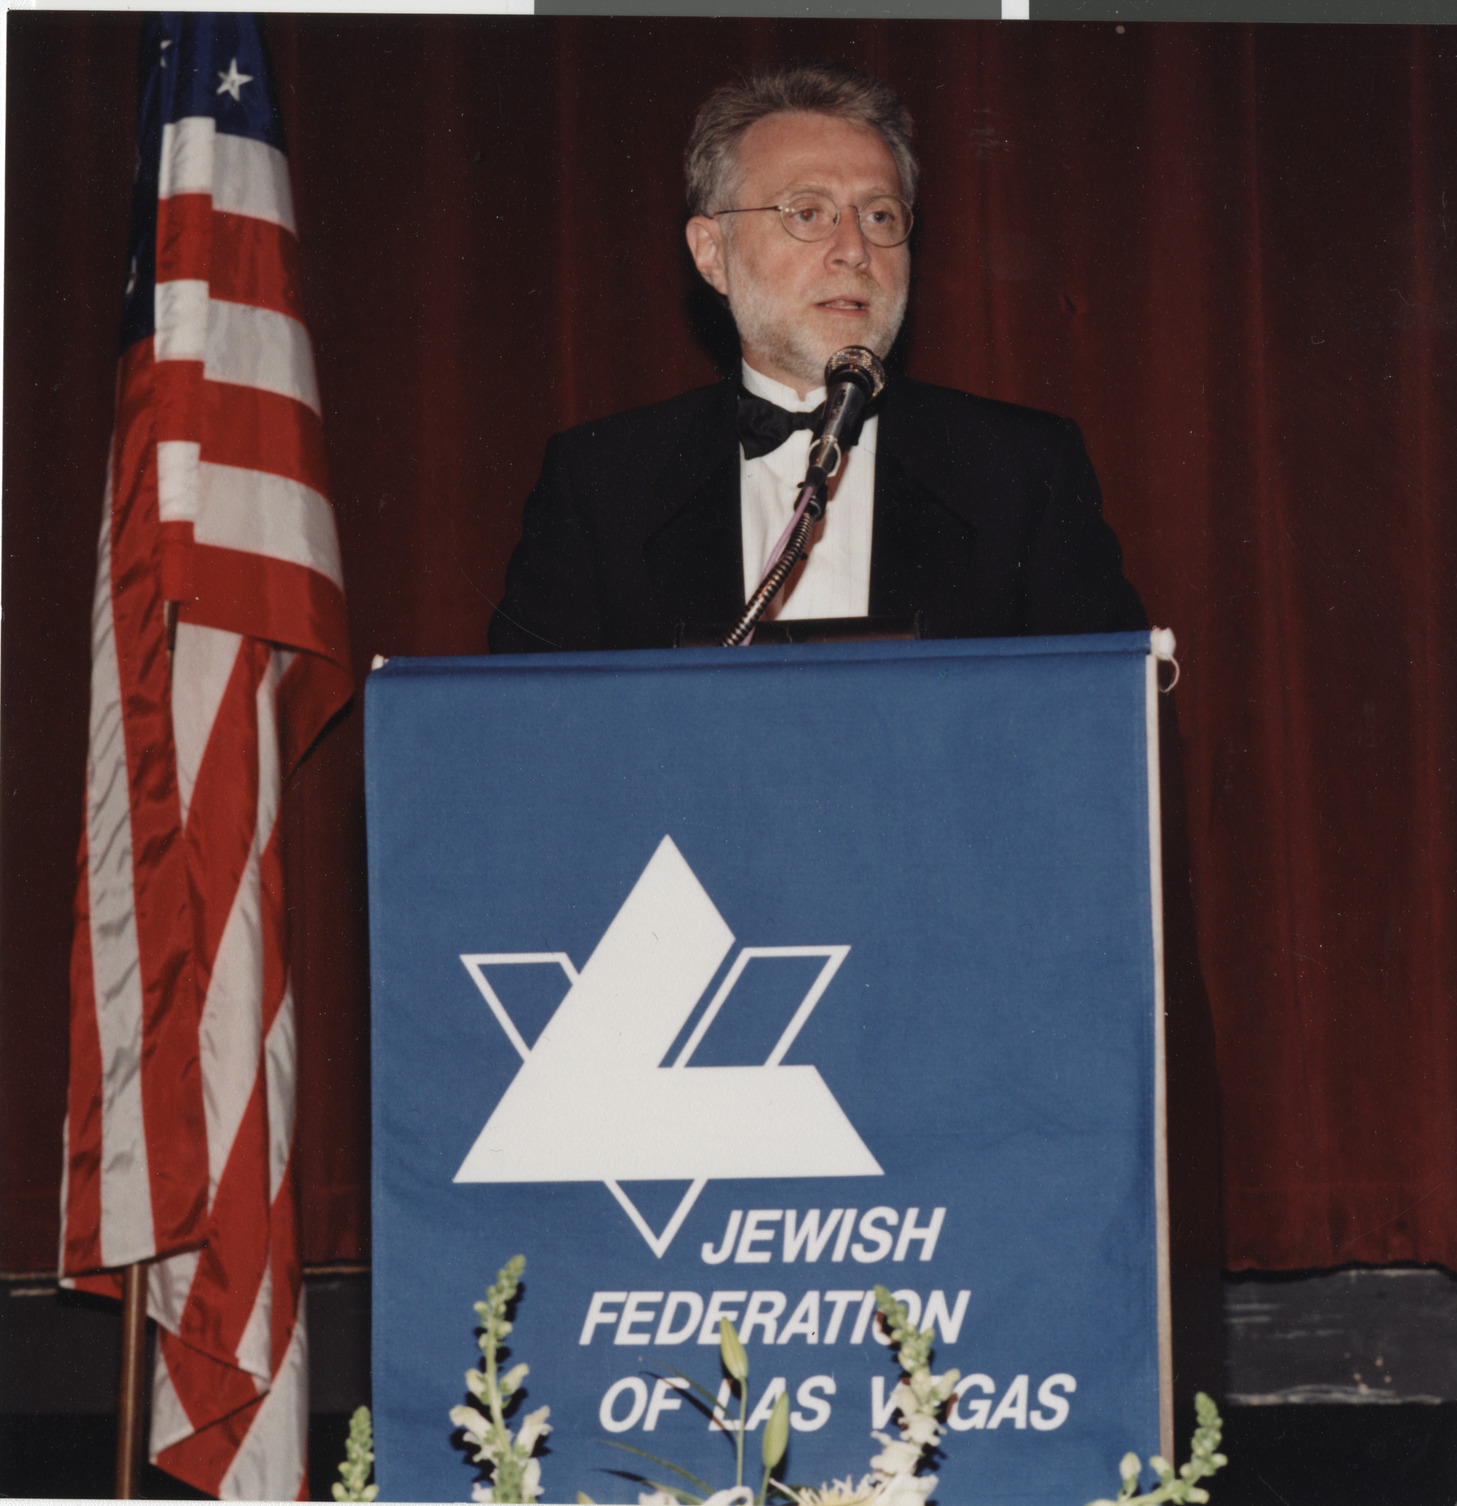 Photograph of event, 1996